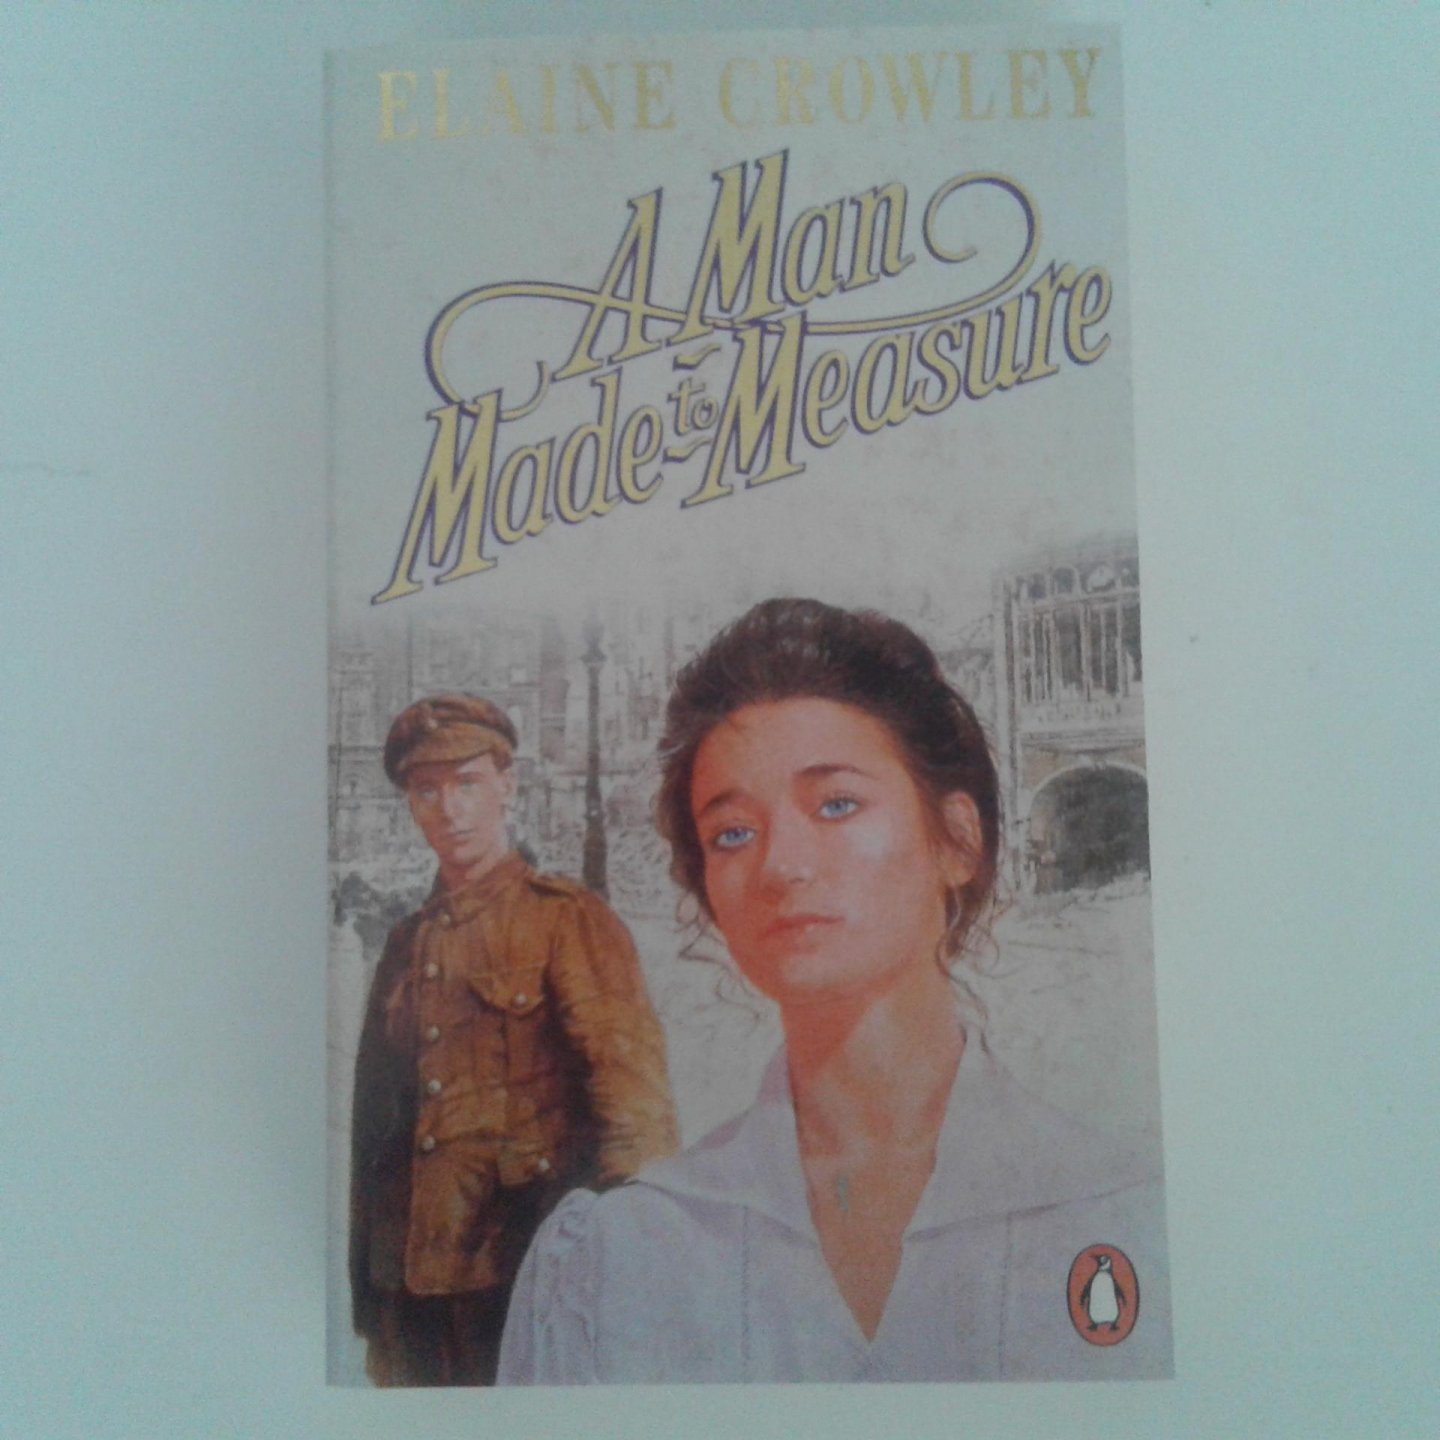 Crowley, Elaine - A Man Made to Measure